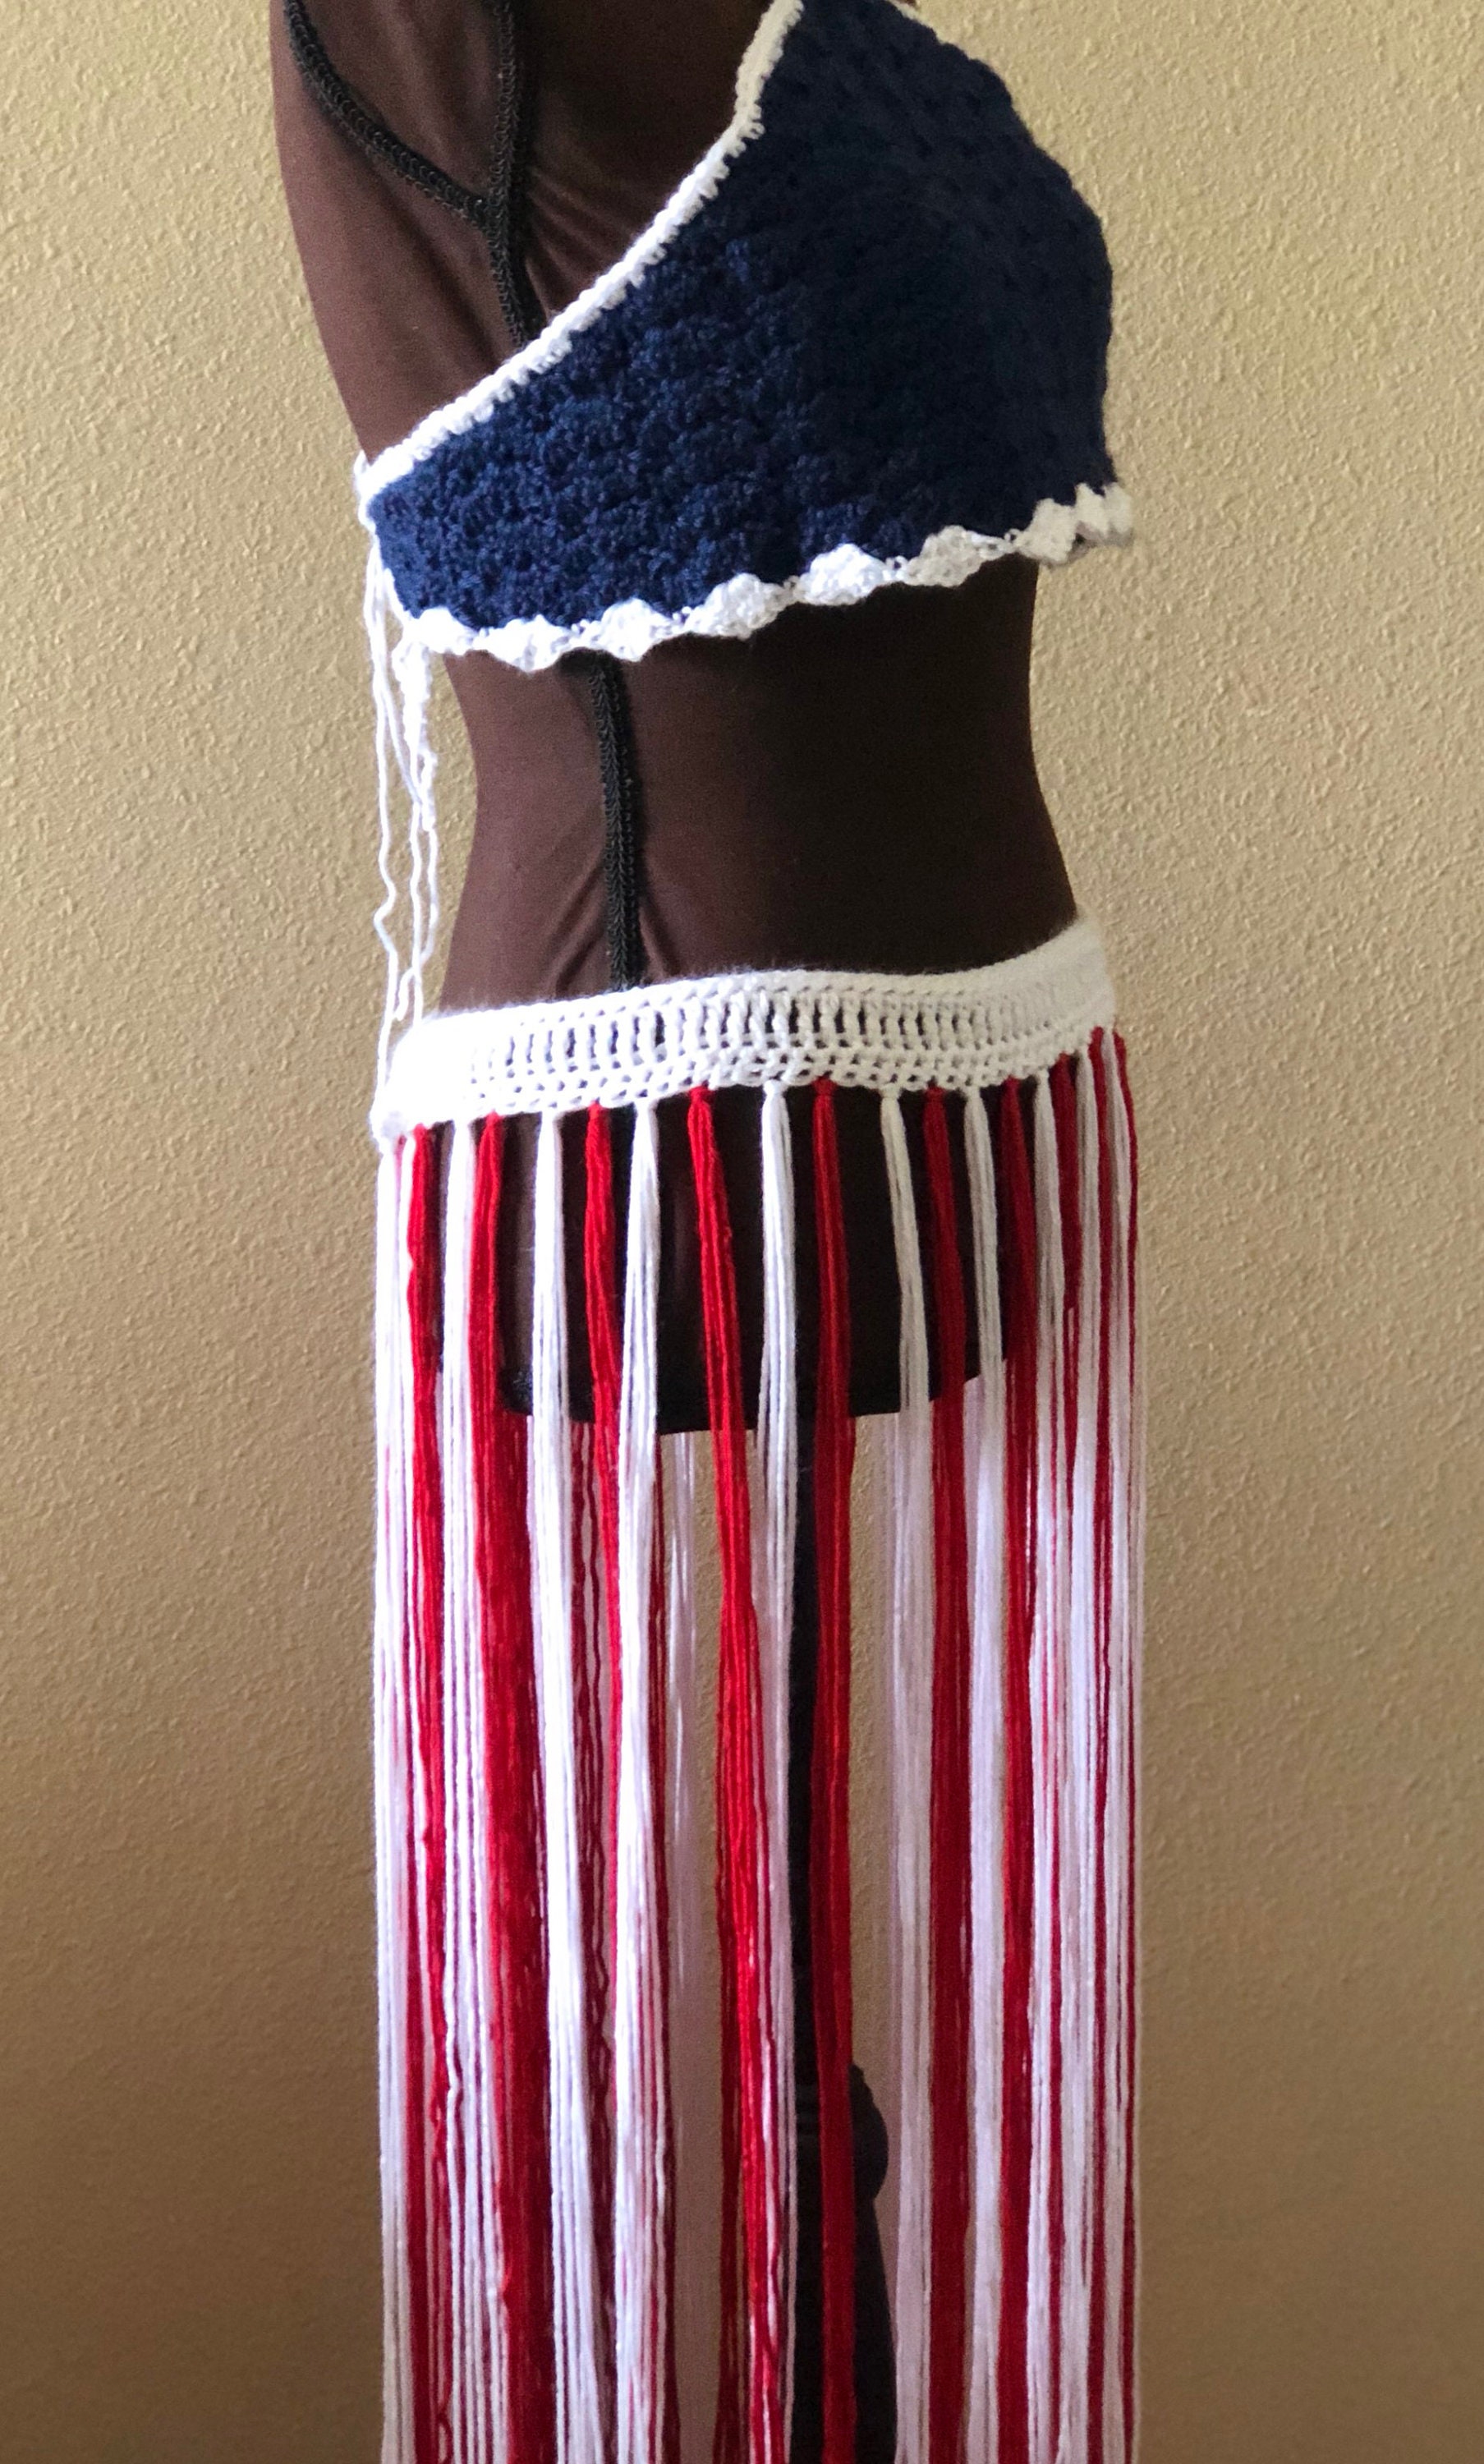 USA Red White and Blue Skirt and Halter Top Outfit / Beach | Etsy